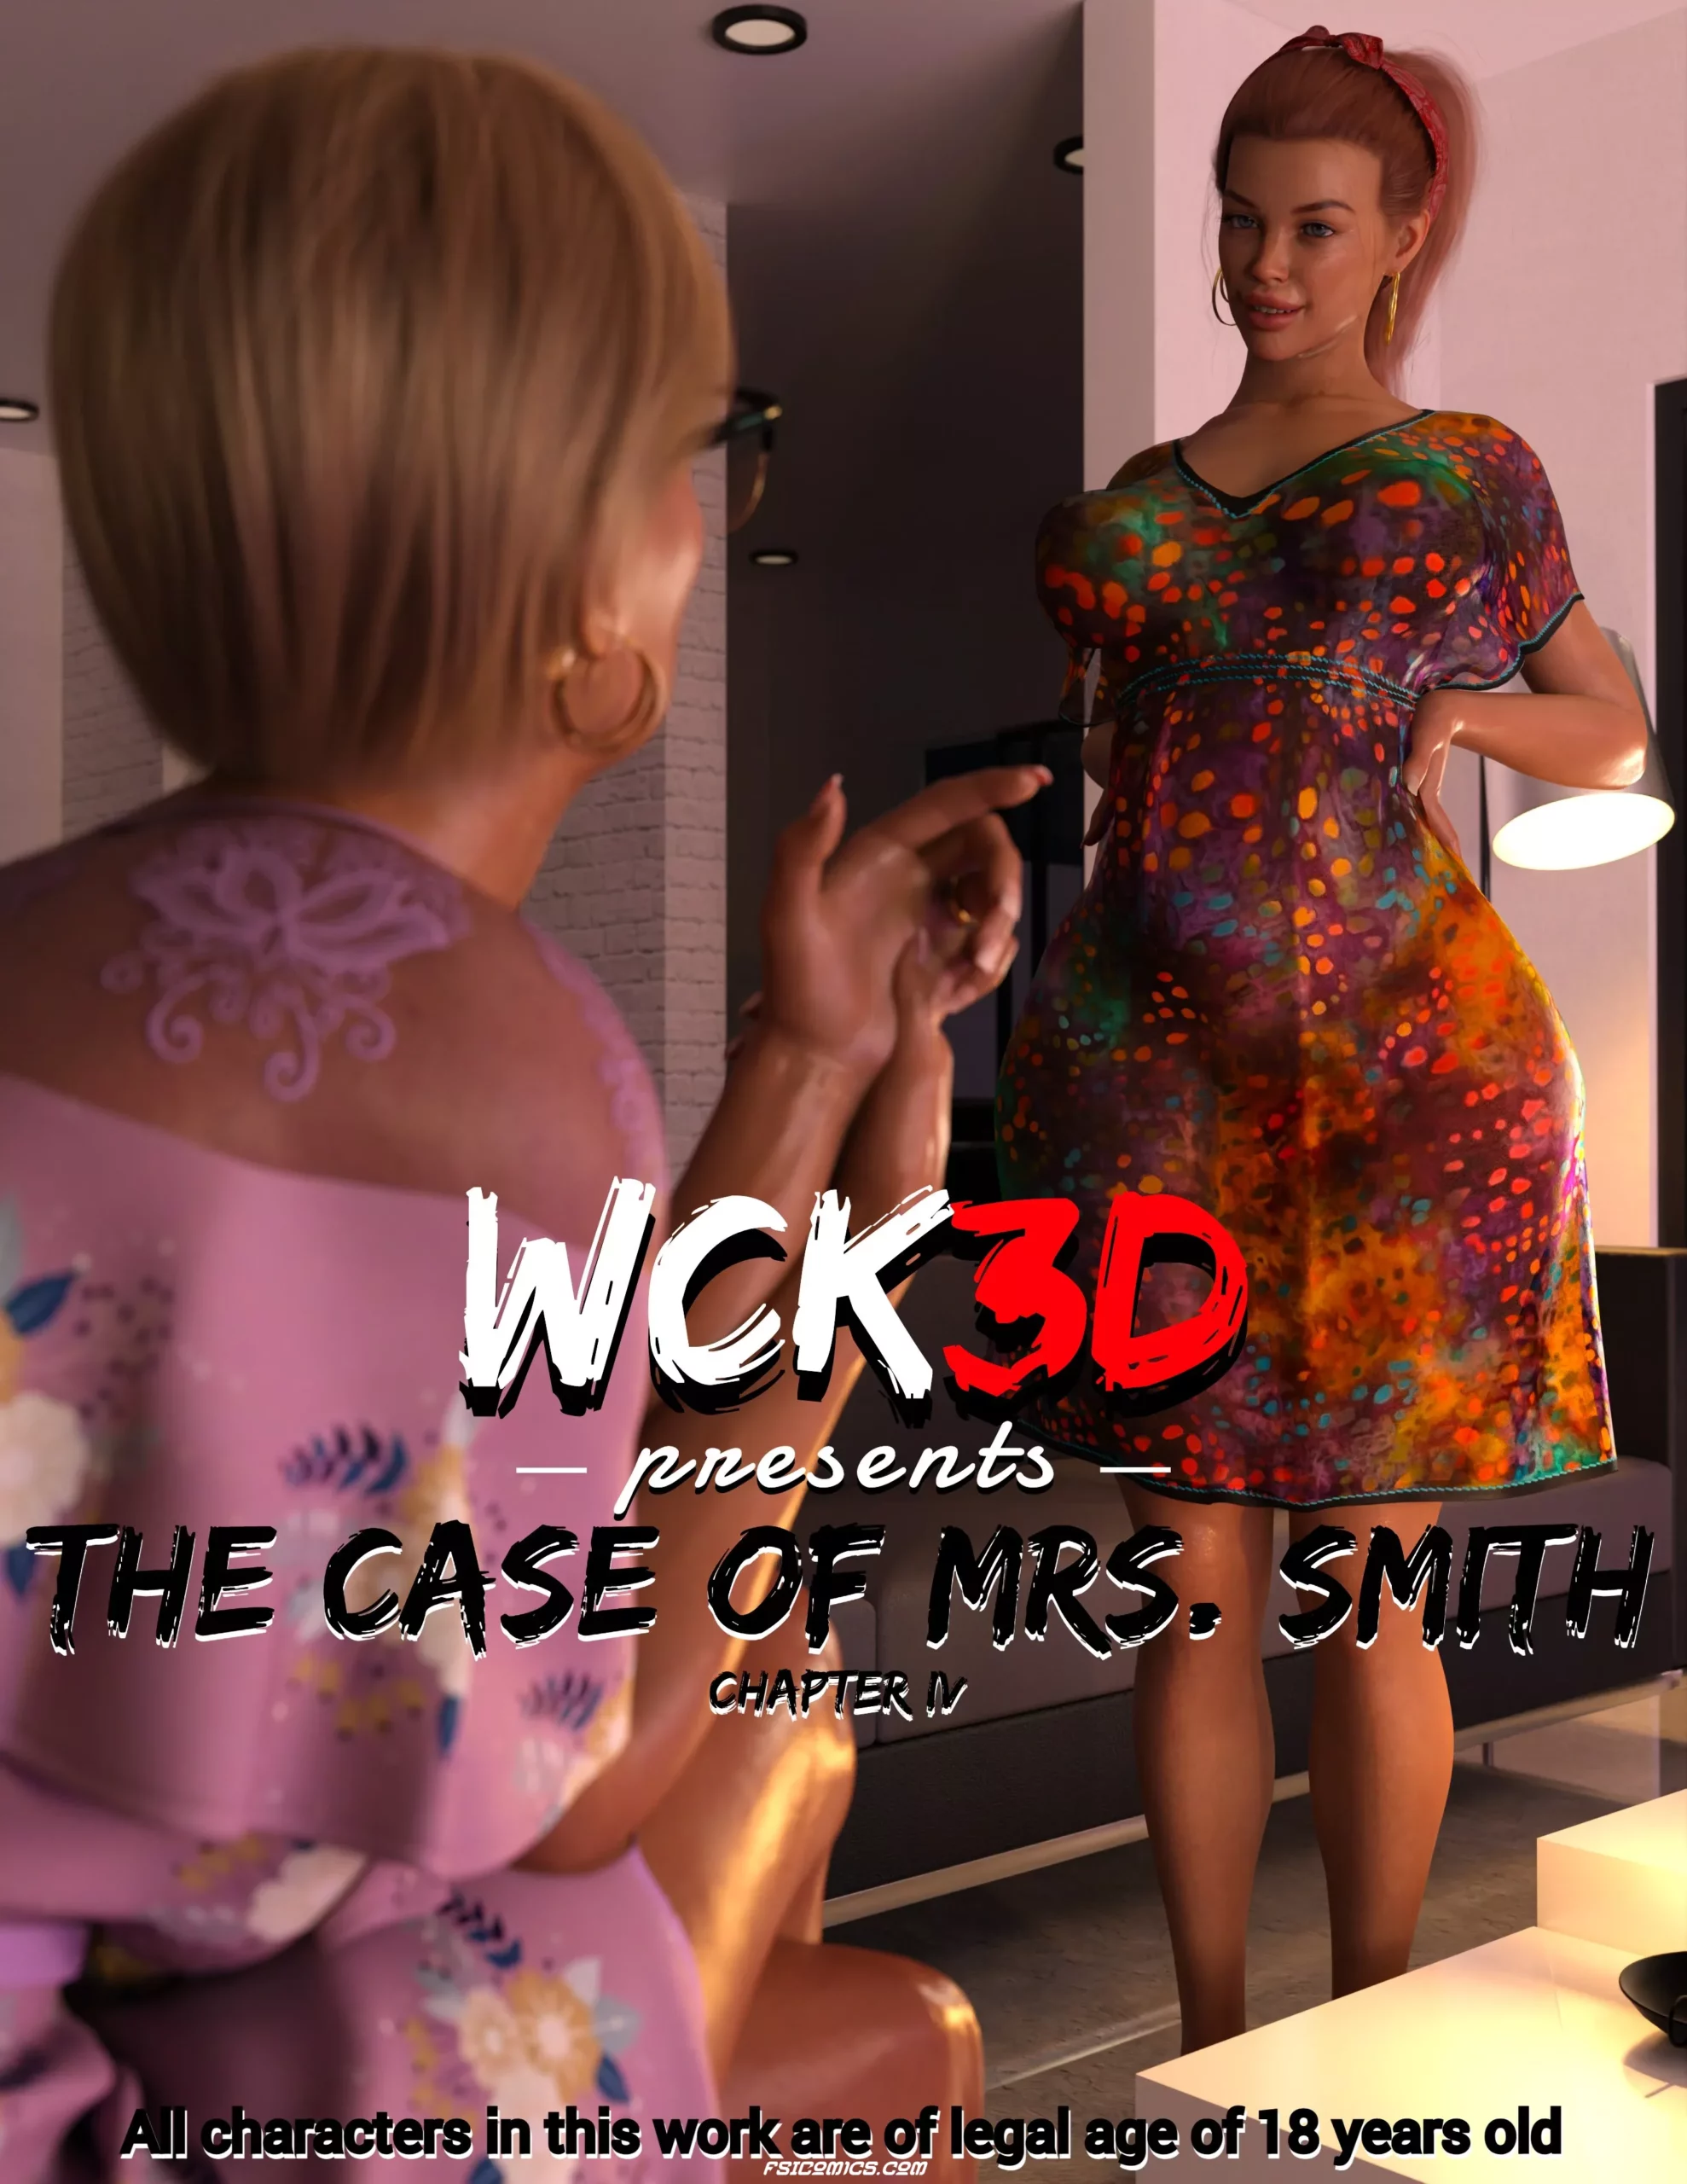 The Case Of Mrs Smith Chapter 4 - WCK3D - 19 - FSIComics